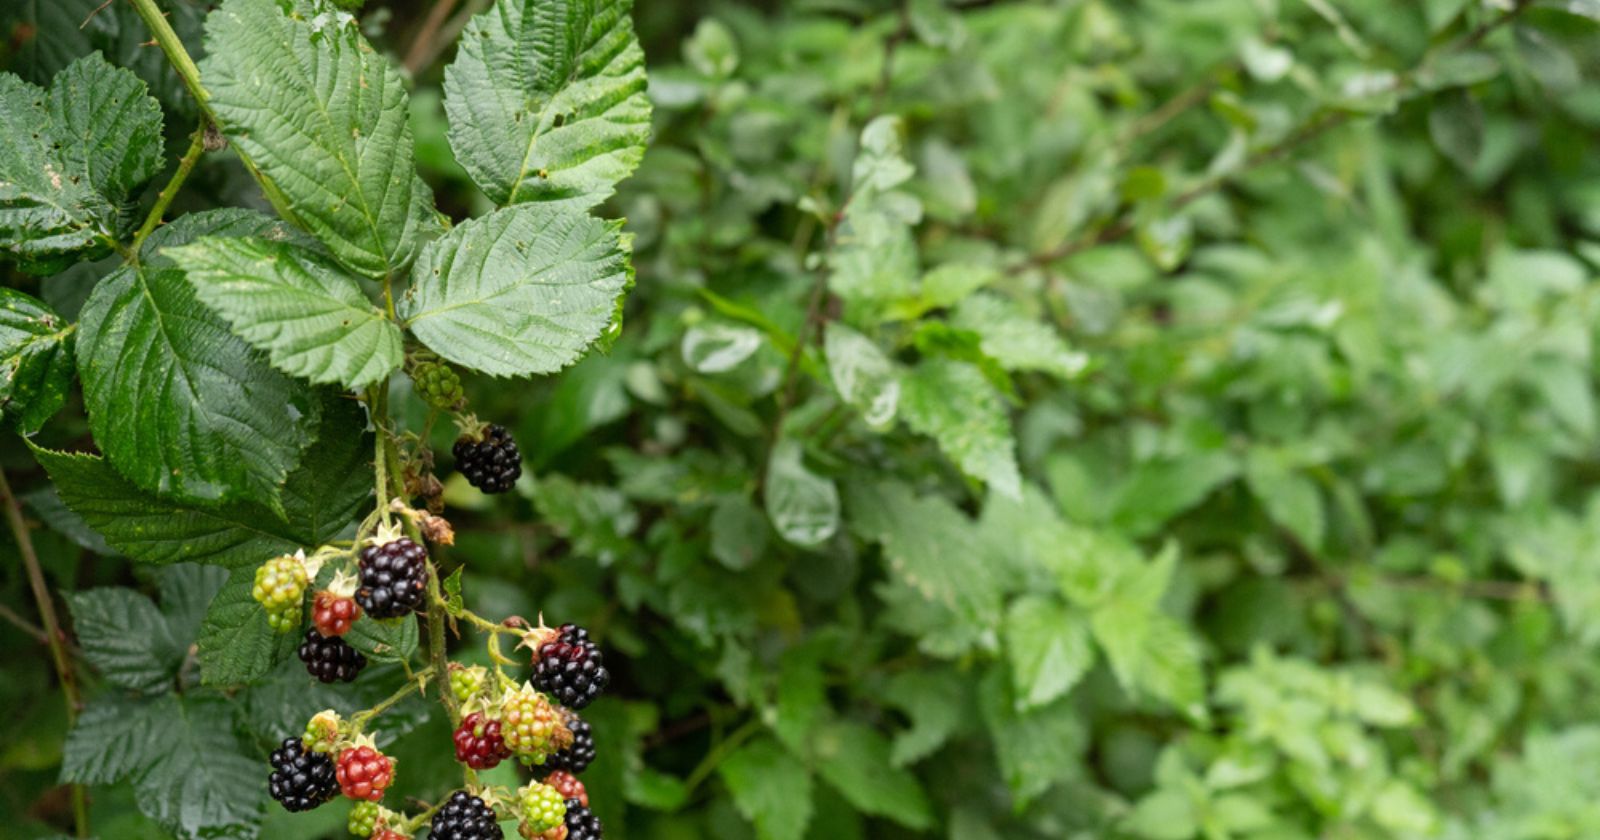 How to get rid of blackberries in the garden?  5 natural and effective tips.